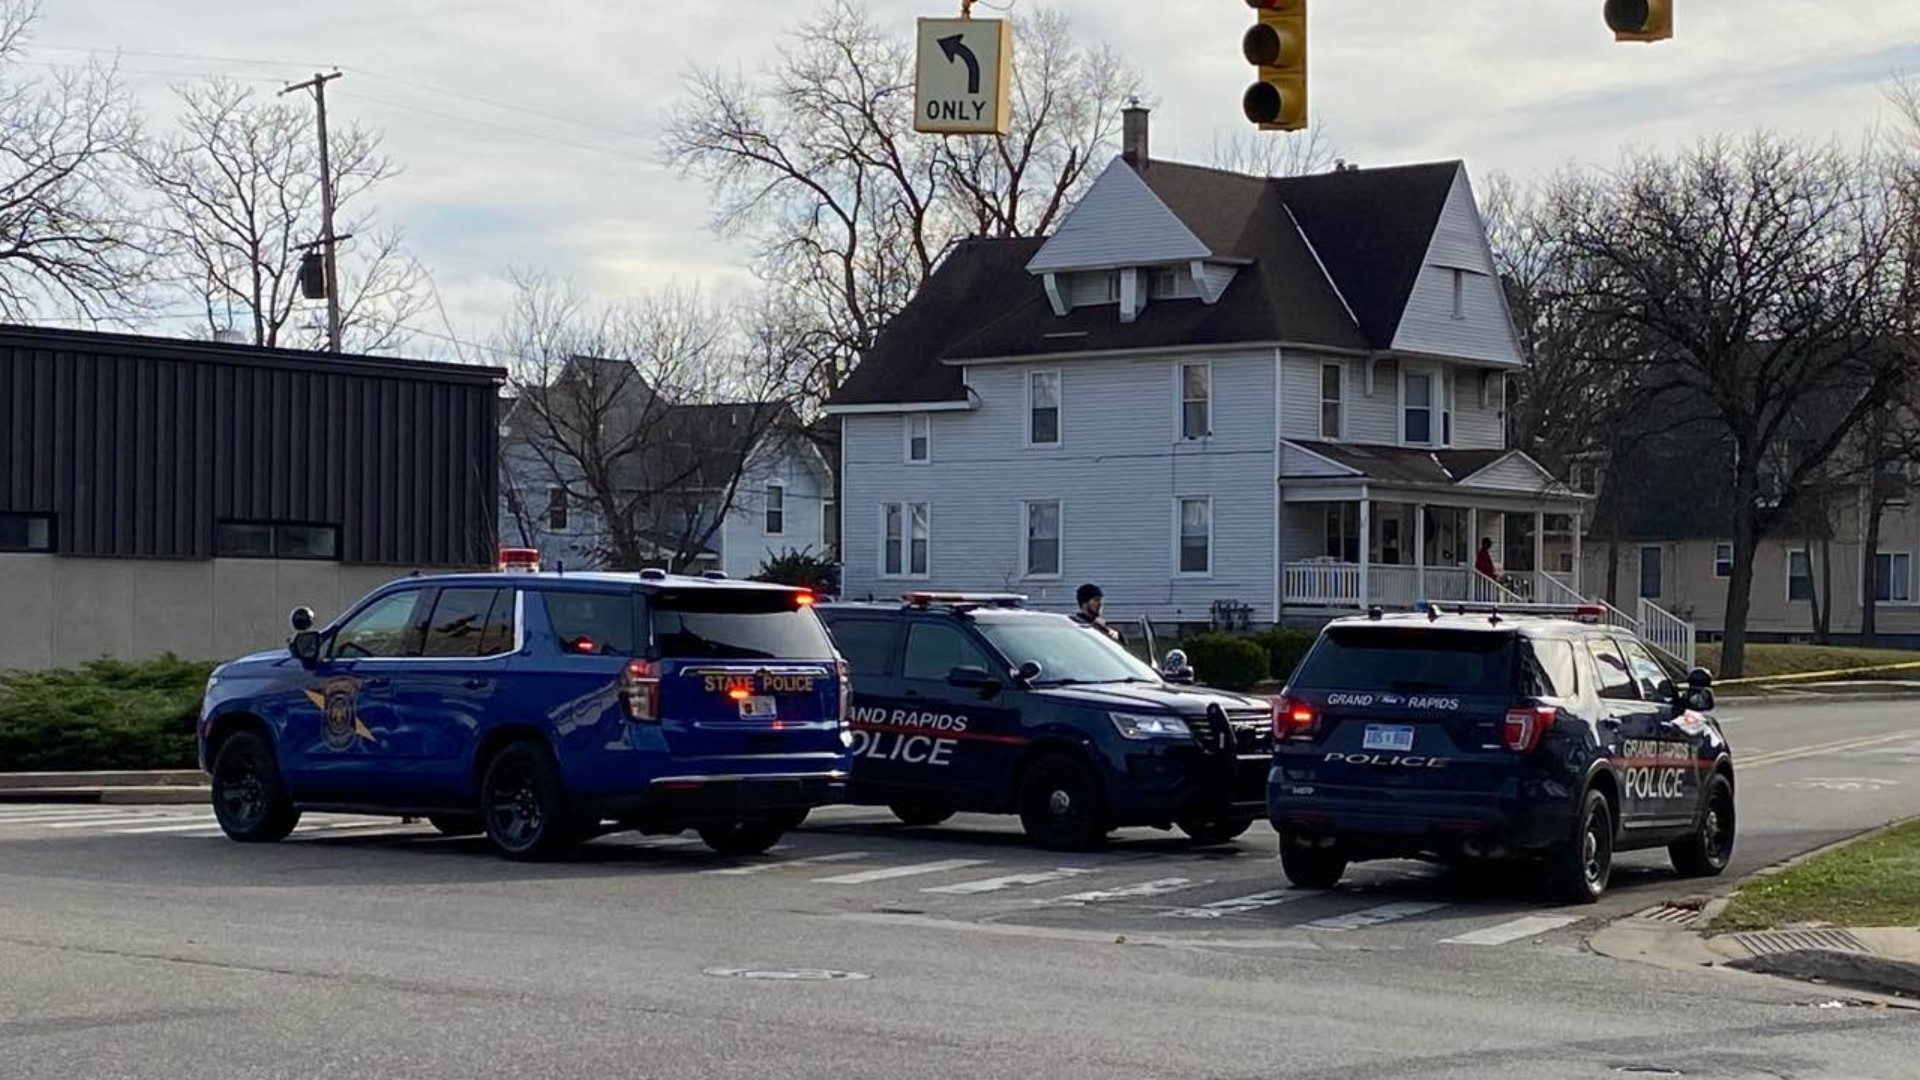 The Grand Rapids Police Department confirmed a homicide suspect was found dead following a shootout with officers Thursday afternoon.